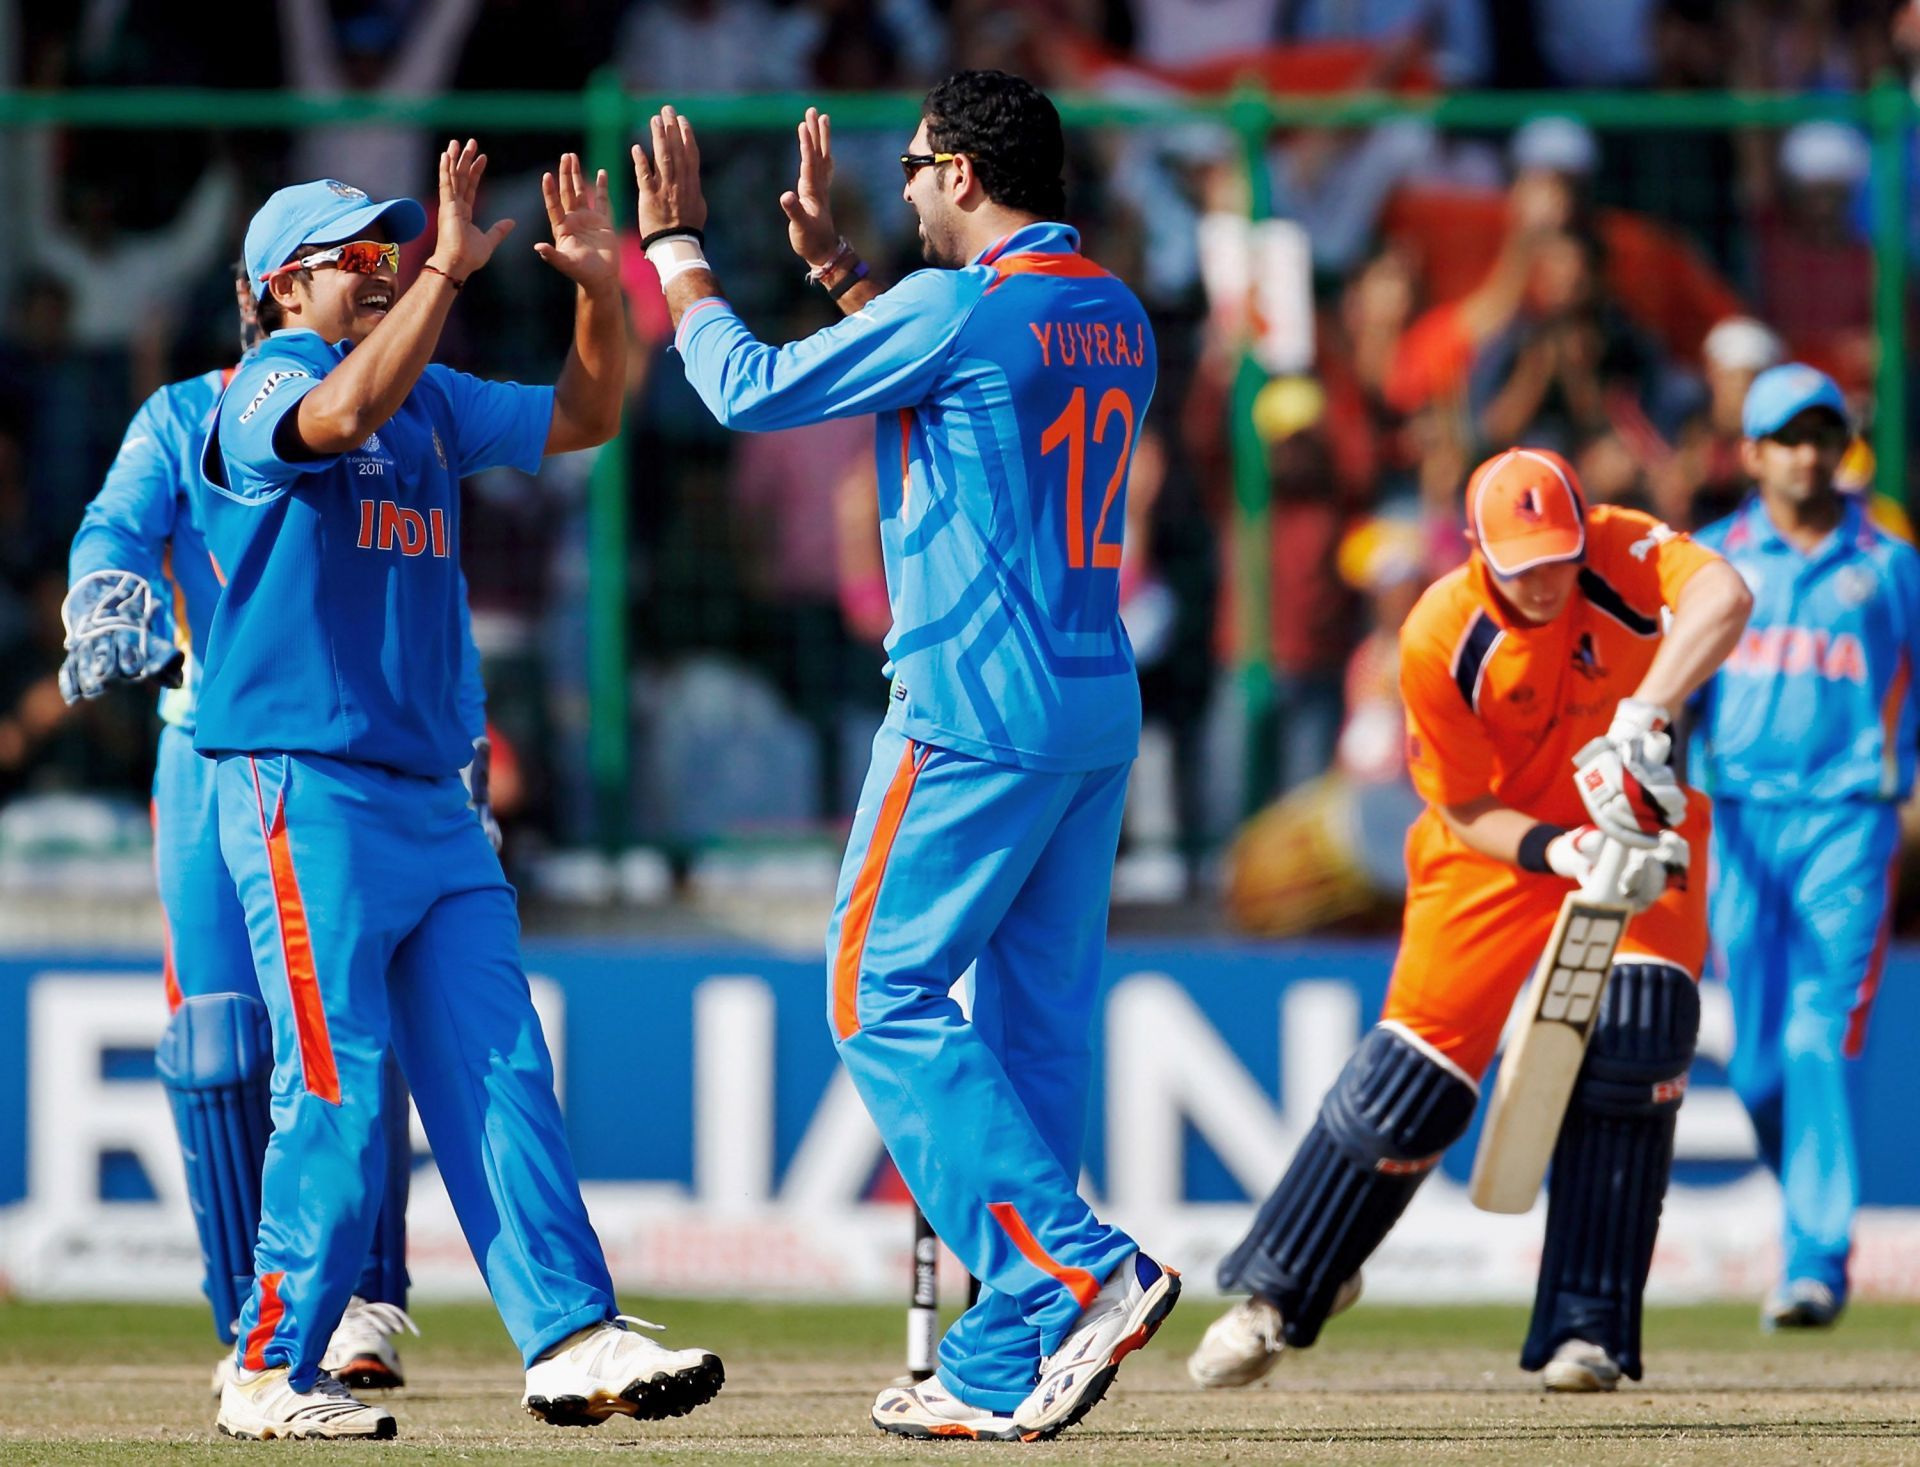 Yuvraj Singh scalped 15 wickets in the 2011 World Cup